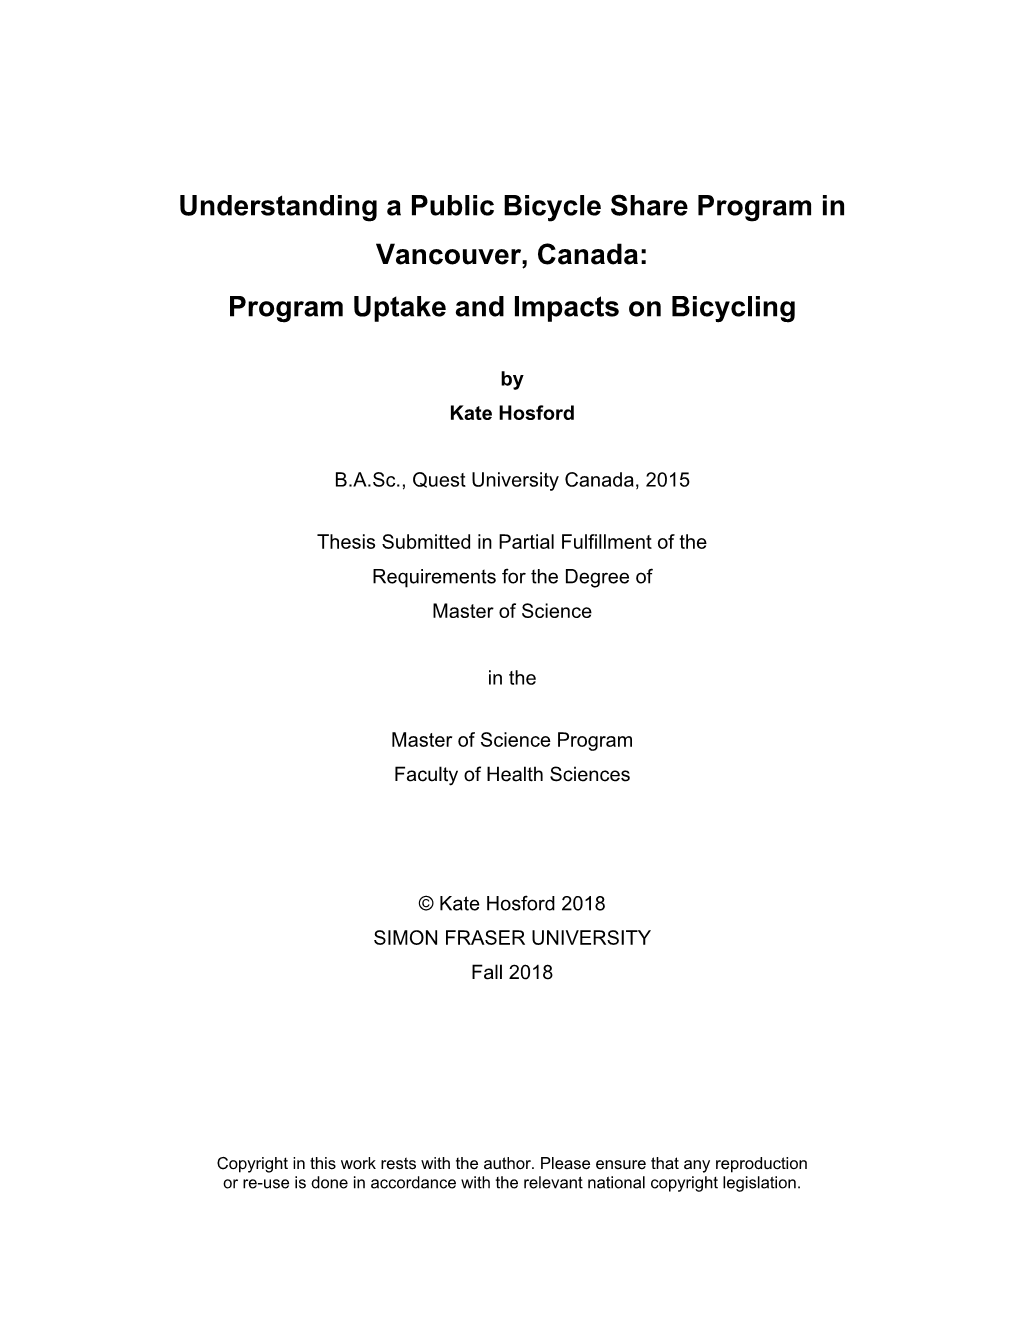 Understanding a Public Bicycle Share Program in Vancouver, Canada: Program Uptake and Impacts on Bicycling